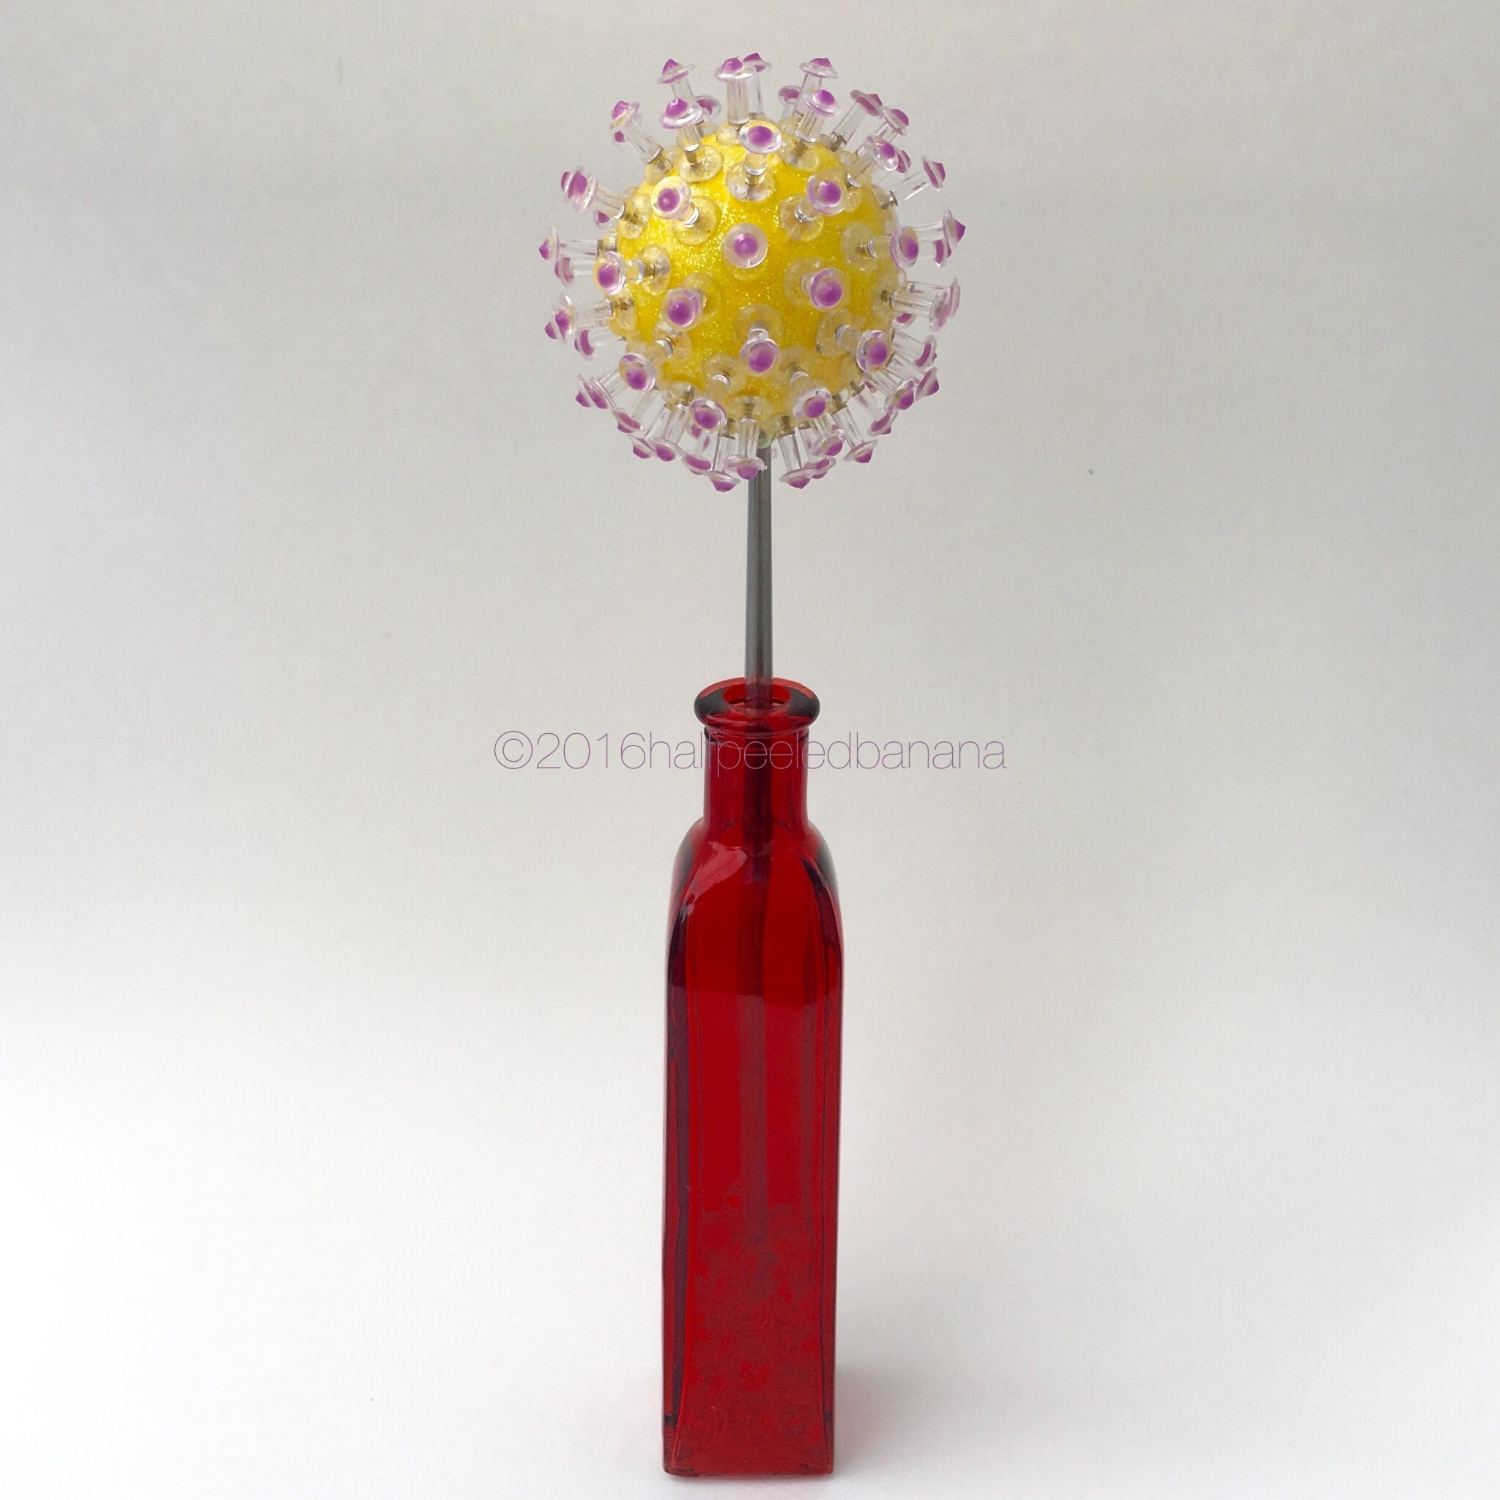 modern elegance - 3" tabletop flower in yellow with purple dots